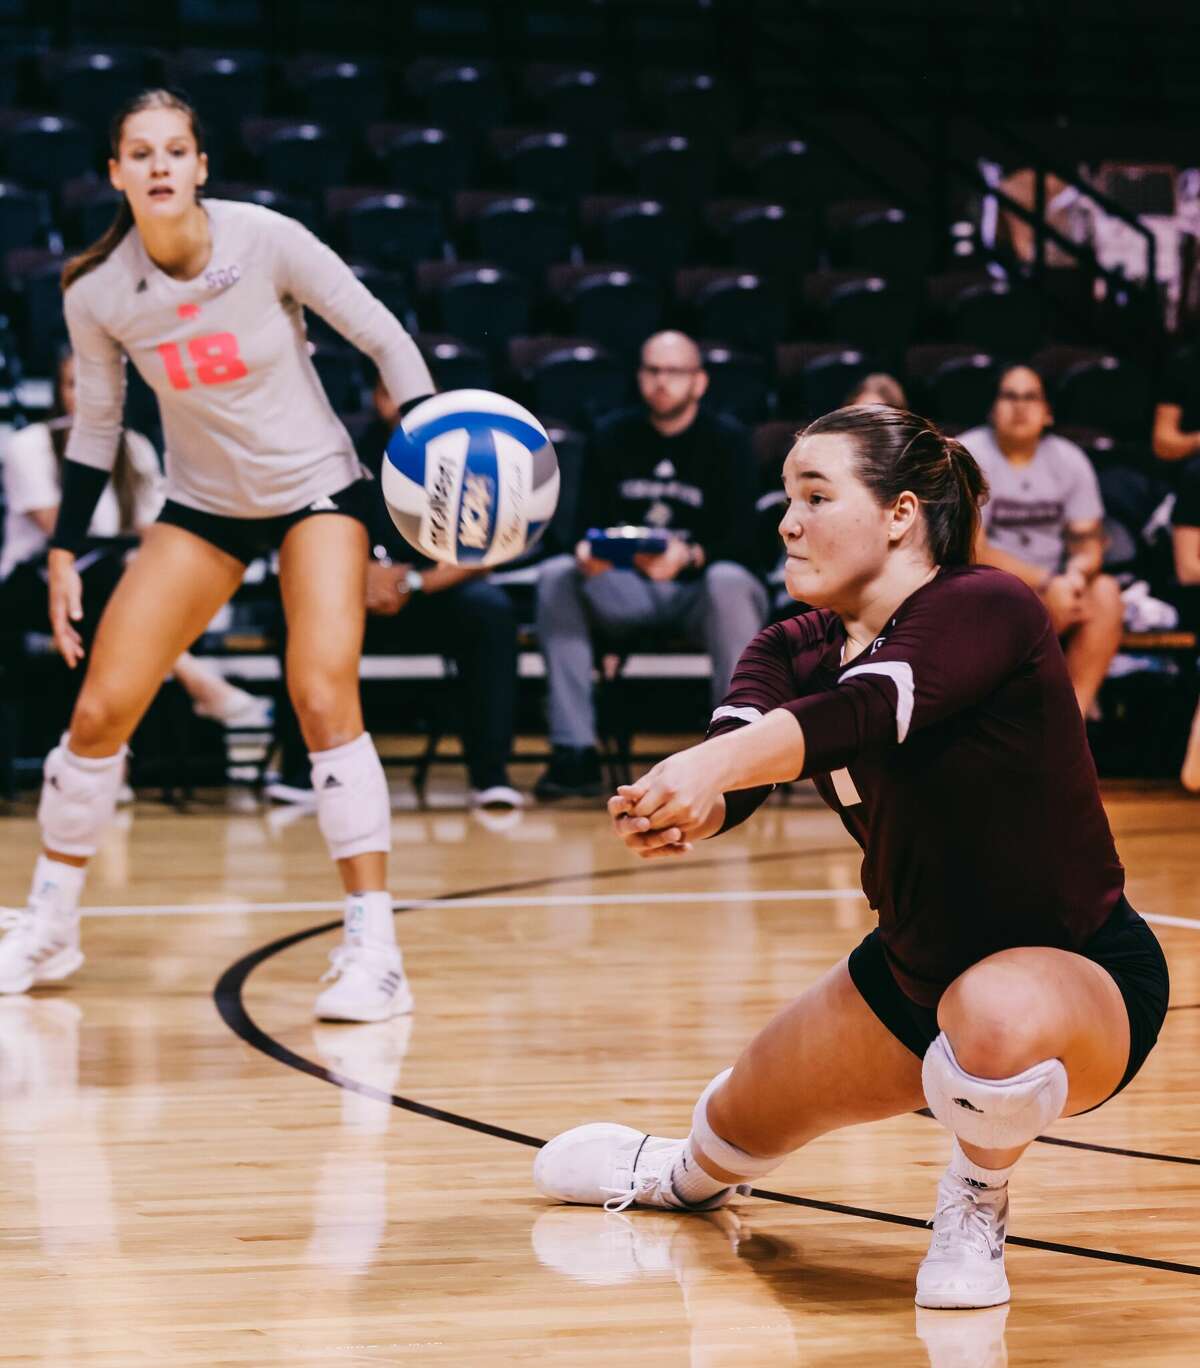 Texas State volleyball player Jacqueline Lee.